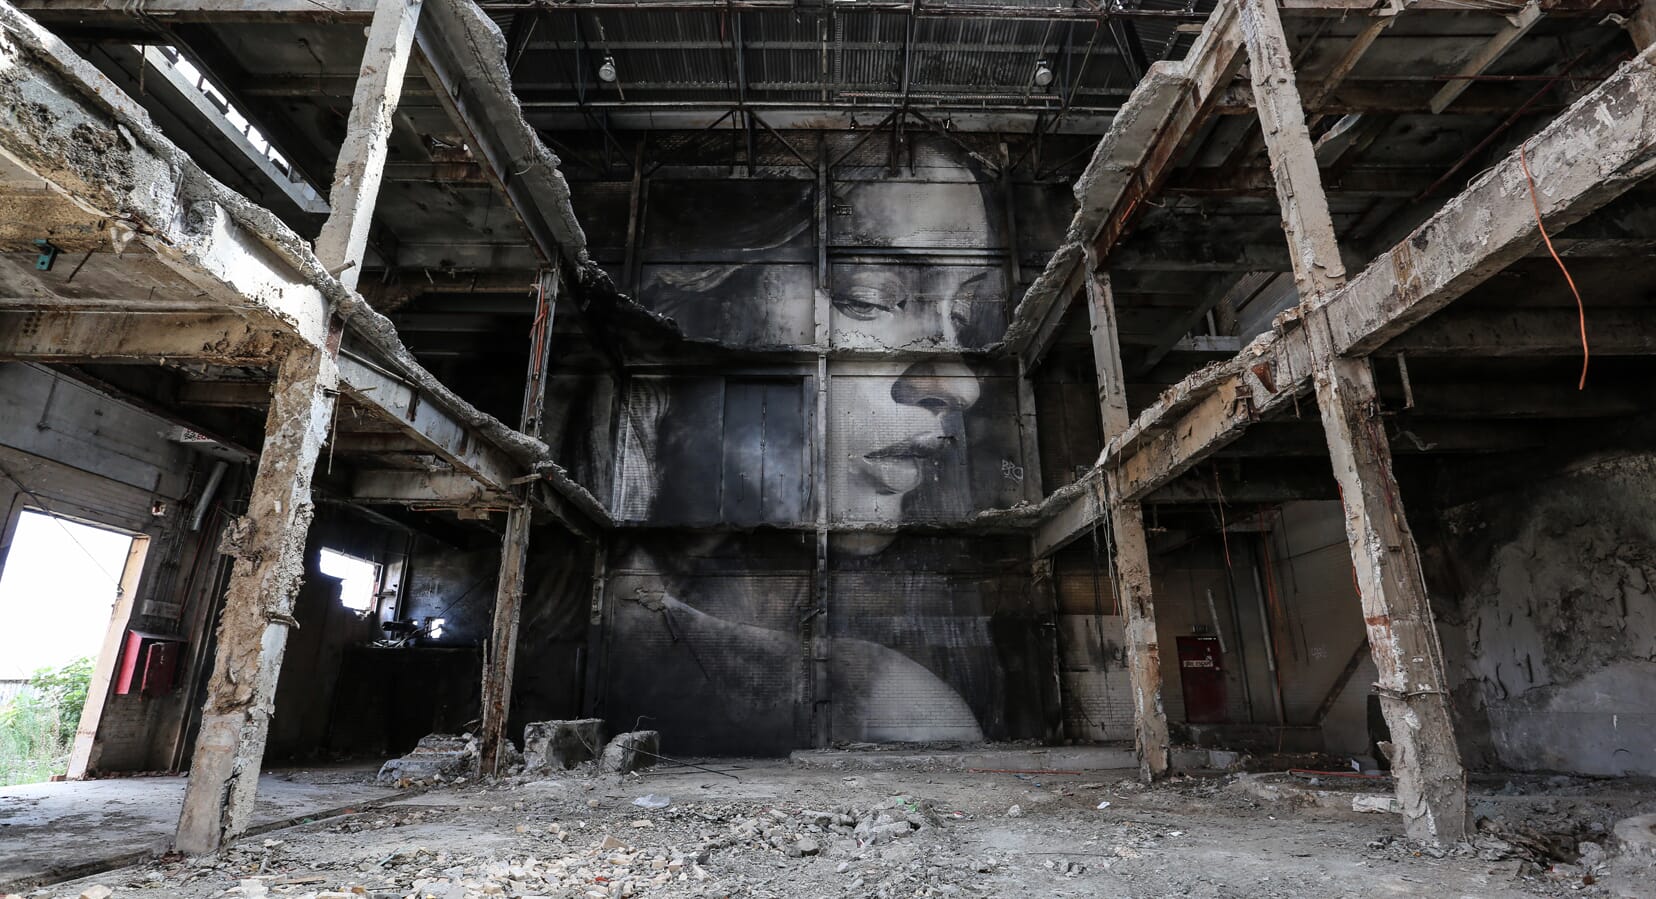 A Vision Amid Ruins: Artist Rone Paints Colossal Portraits of Women in Paper Mill